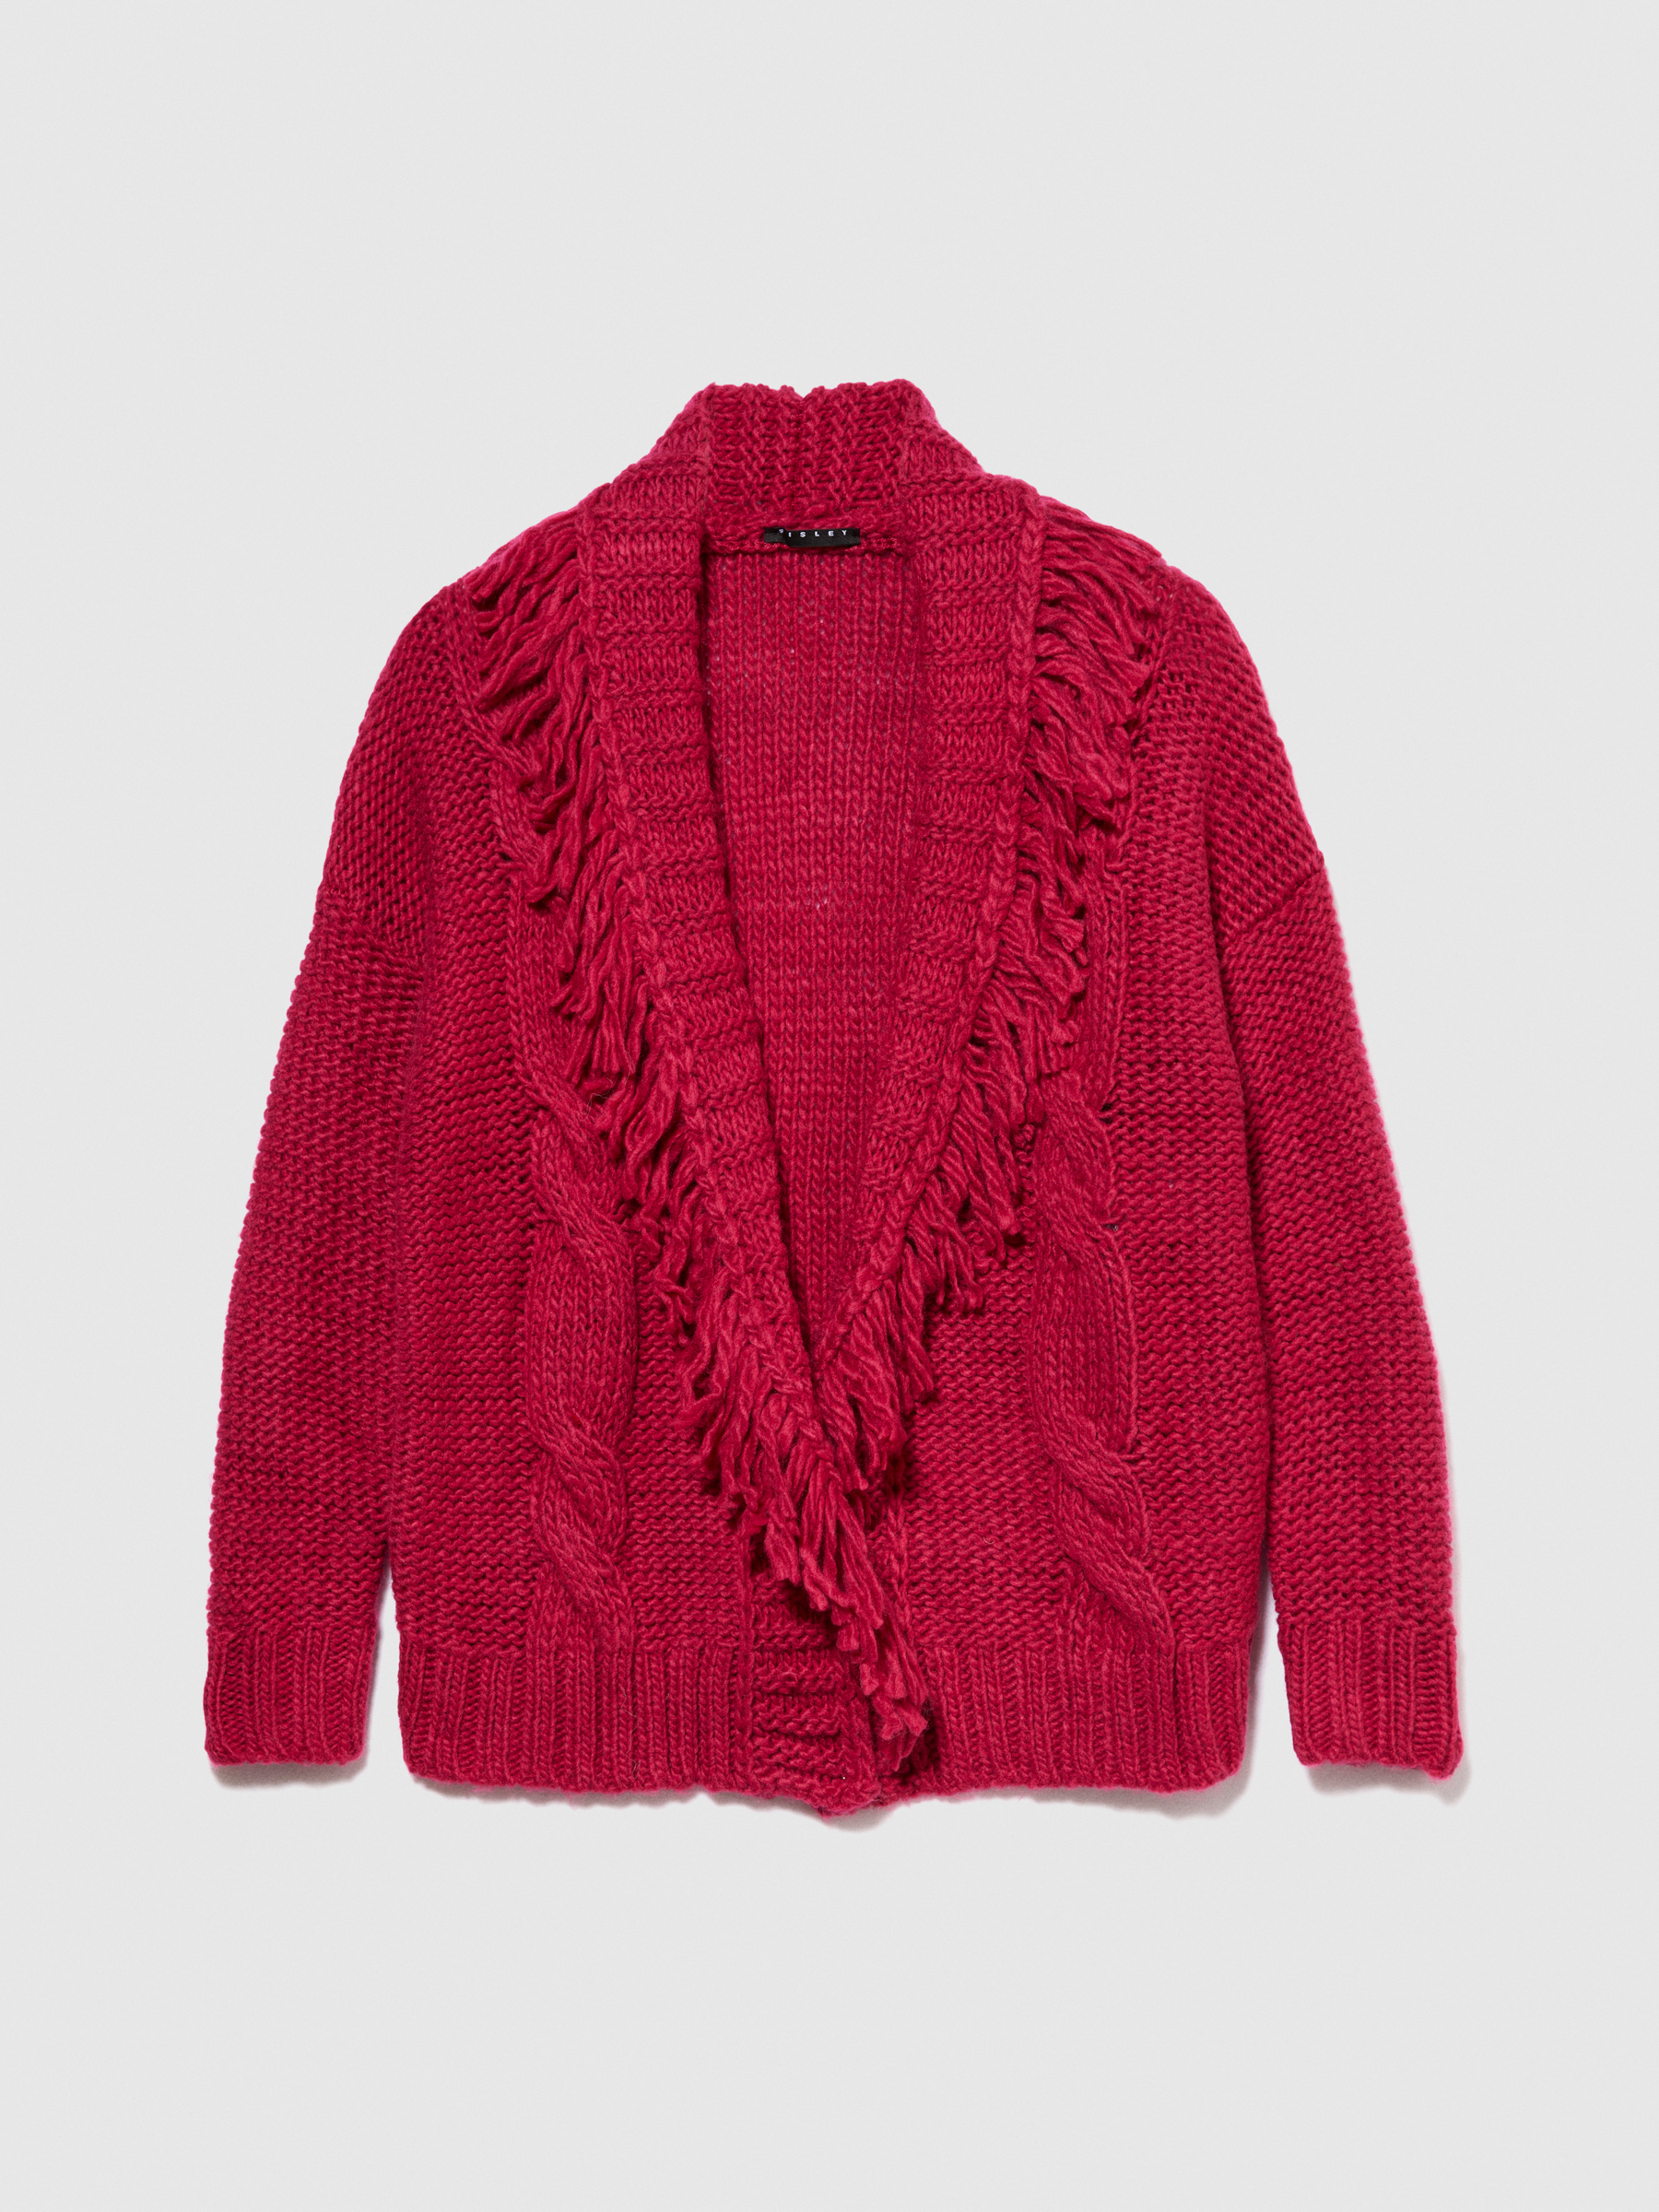 Sisley Young - Cardigan With Fringes, Woman, Fuchsia, Size: XL